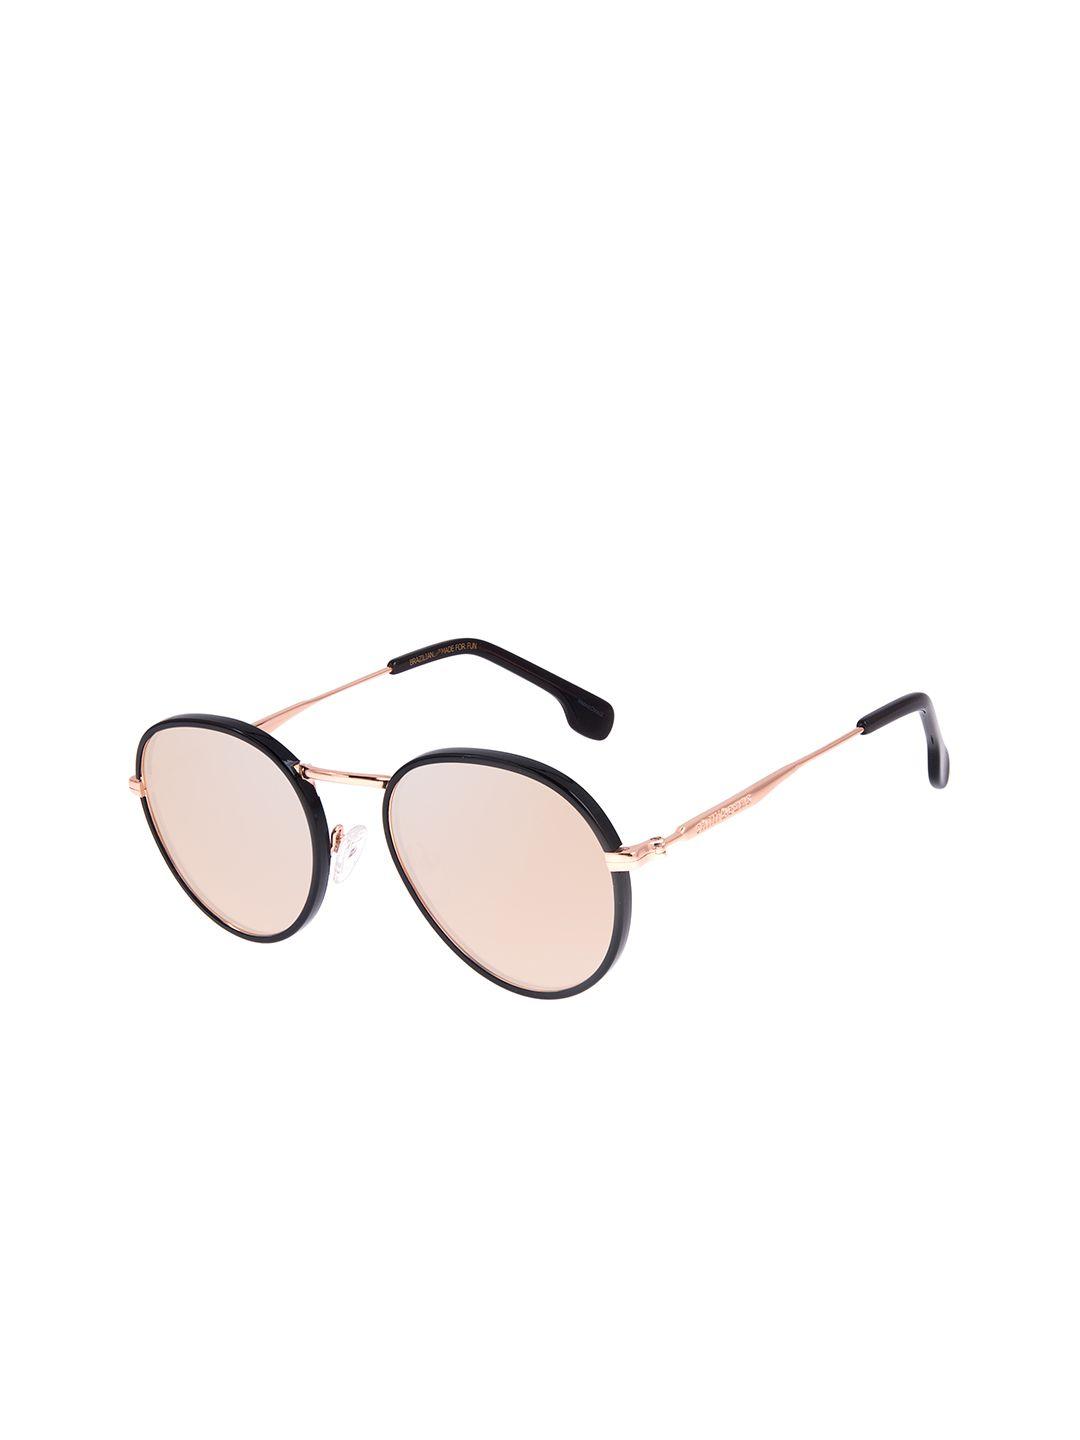 chilli-beans-women-pink-lens-&-rose-gold-toned-round-sunglasses-with-uv-protected-lens